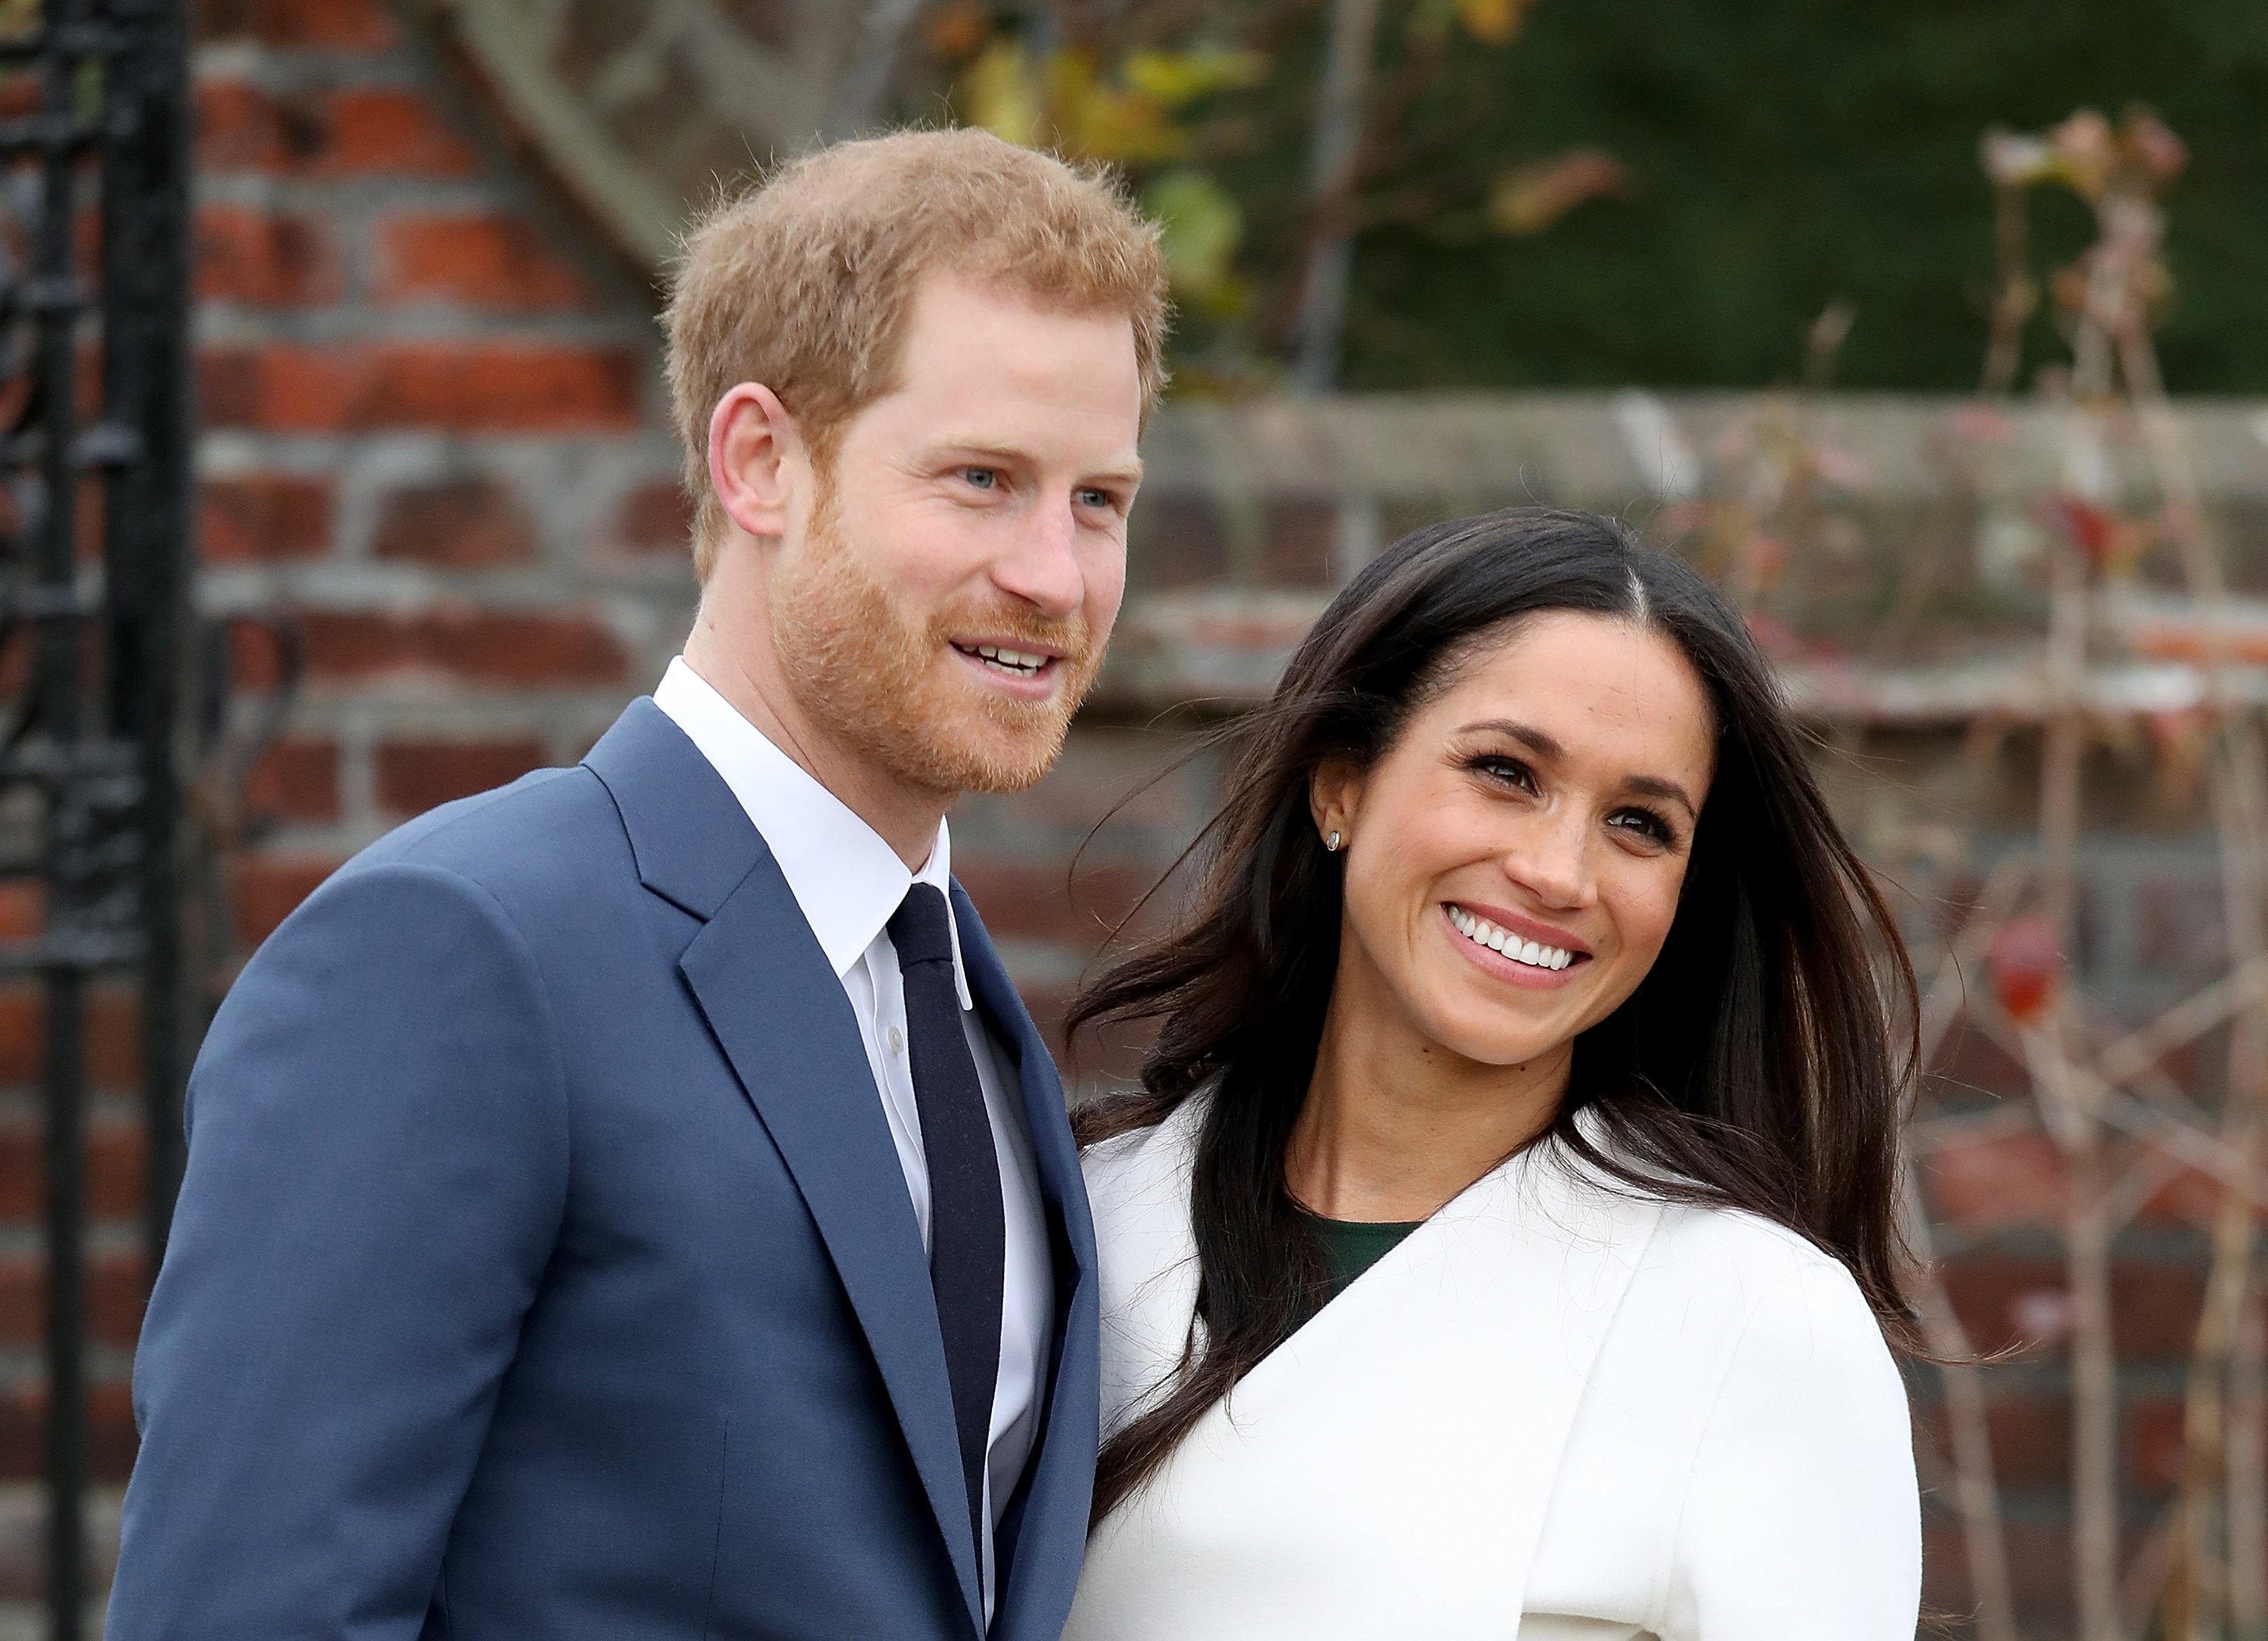 Prince Harry and actress Meghan Markle during an official photocall to announce their engagement at The Sunken Gardens at Kensington Palace on November 27, 2017 in London, England.| Source: Getty Images